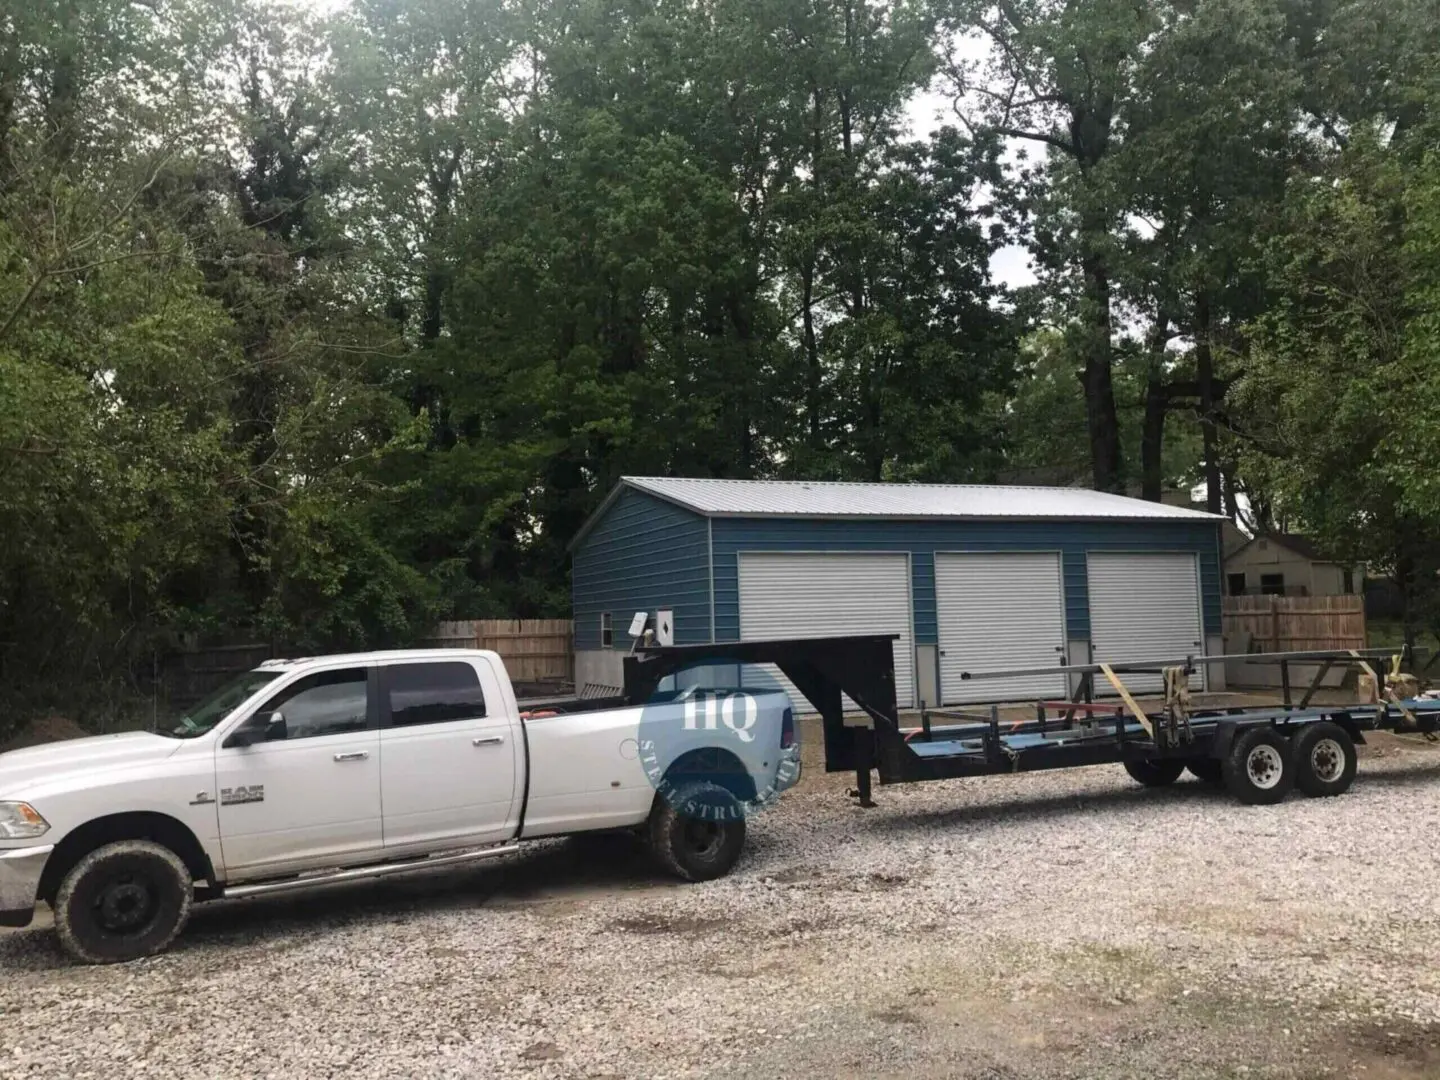 A white truck pulling a trailer with a blue shed.